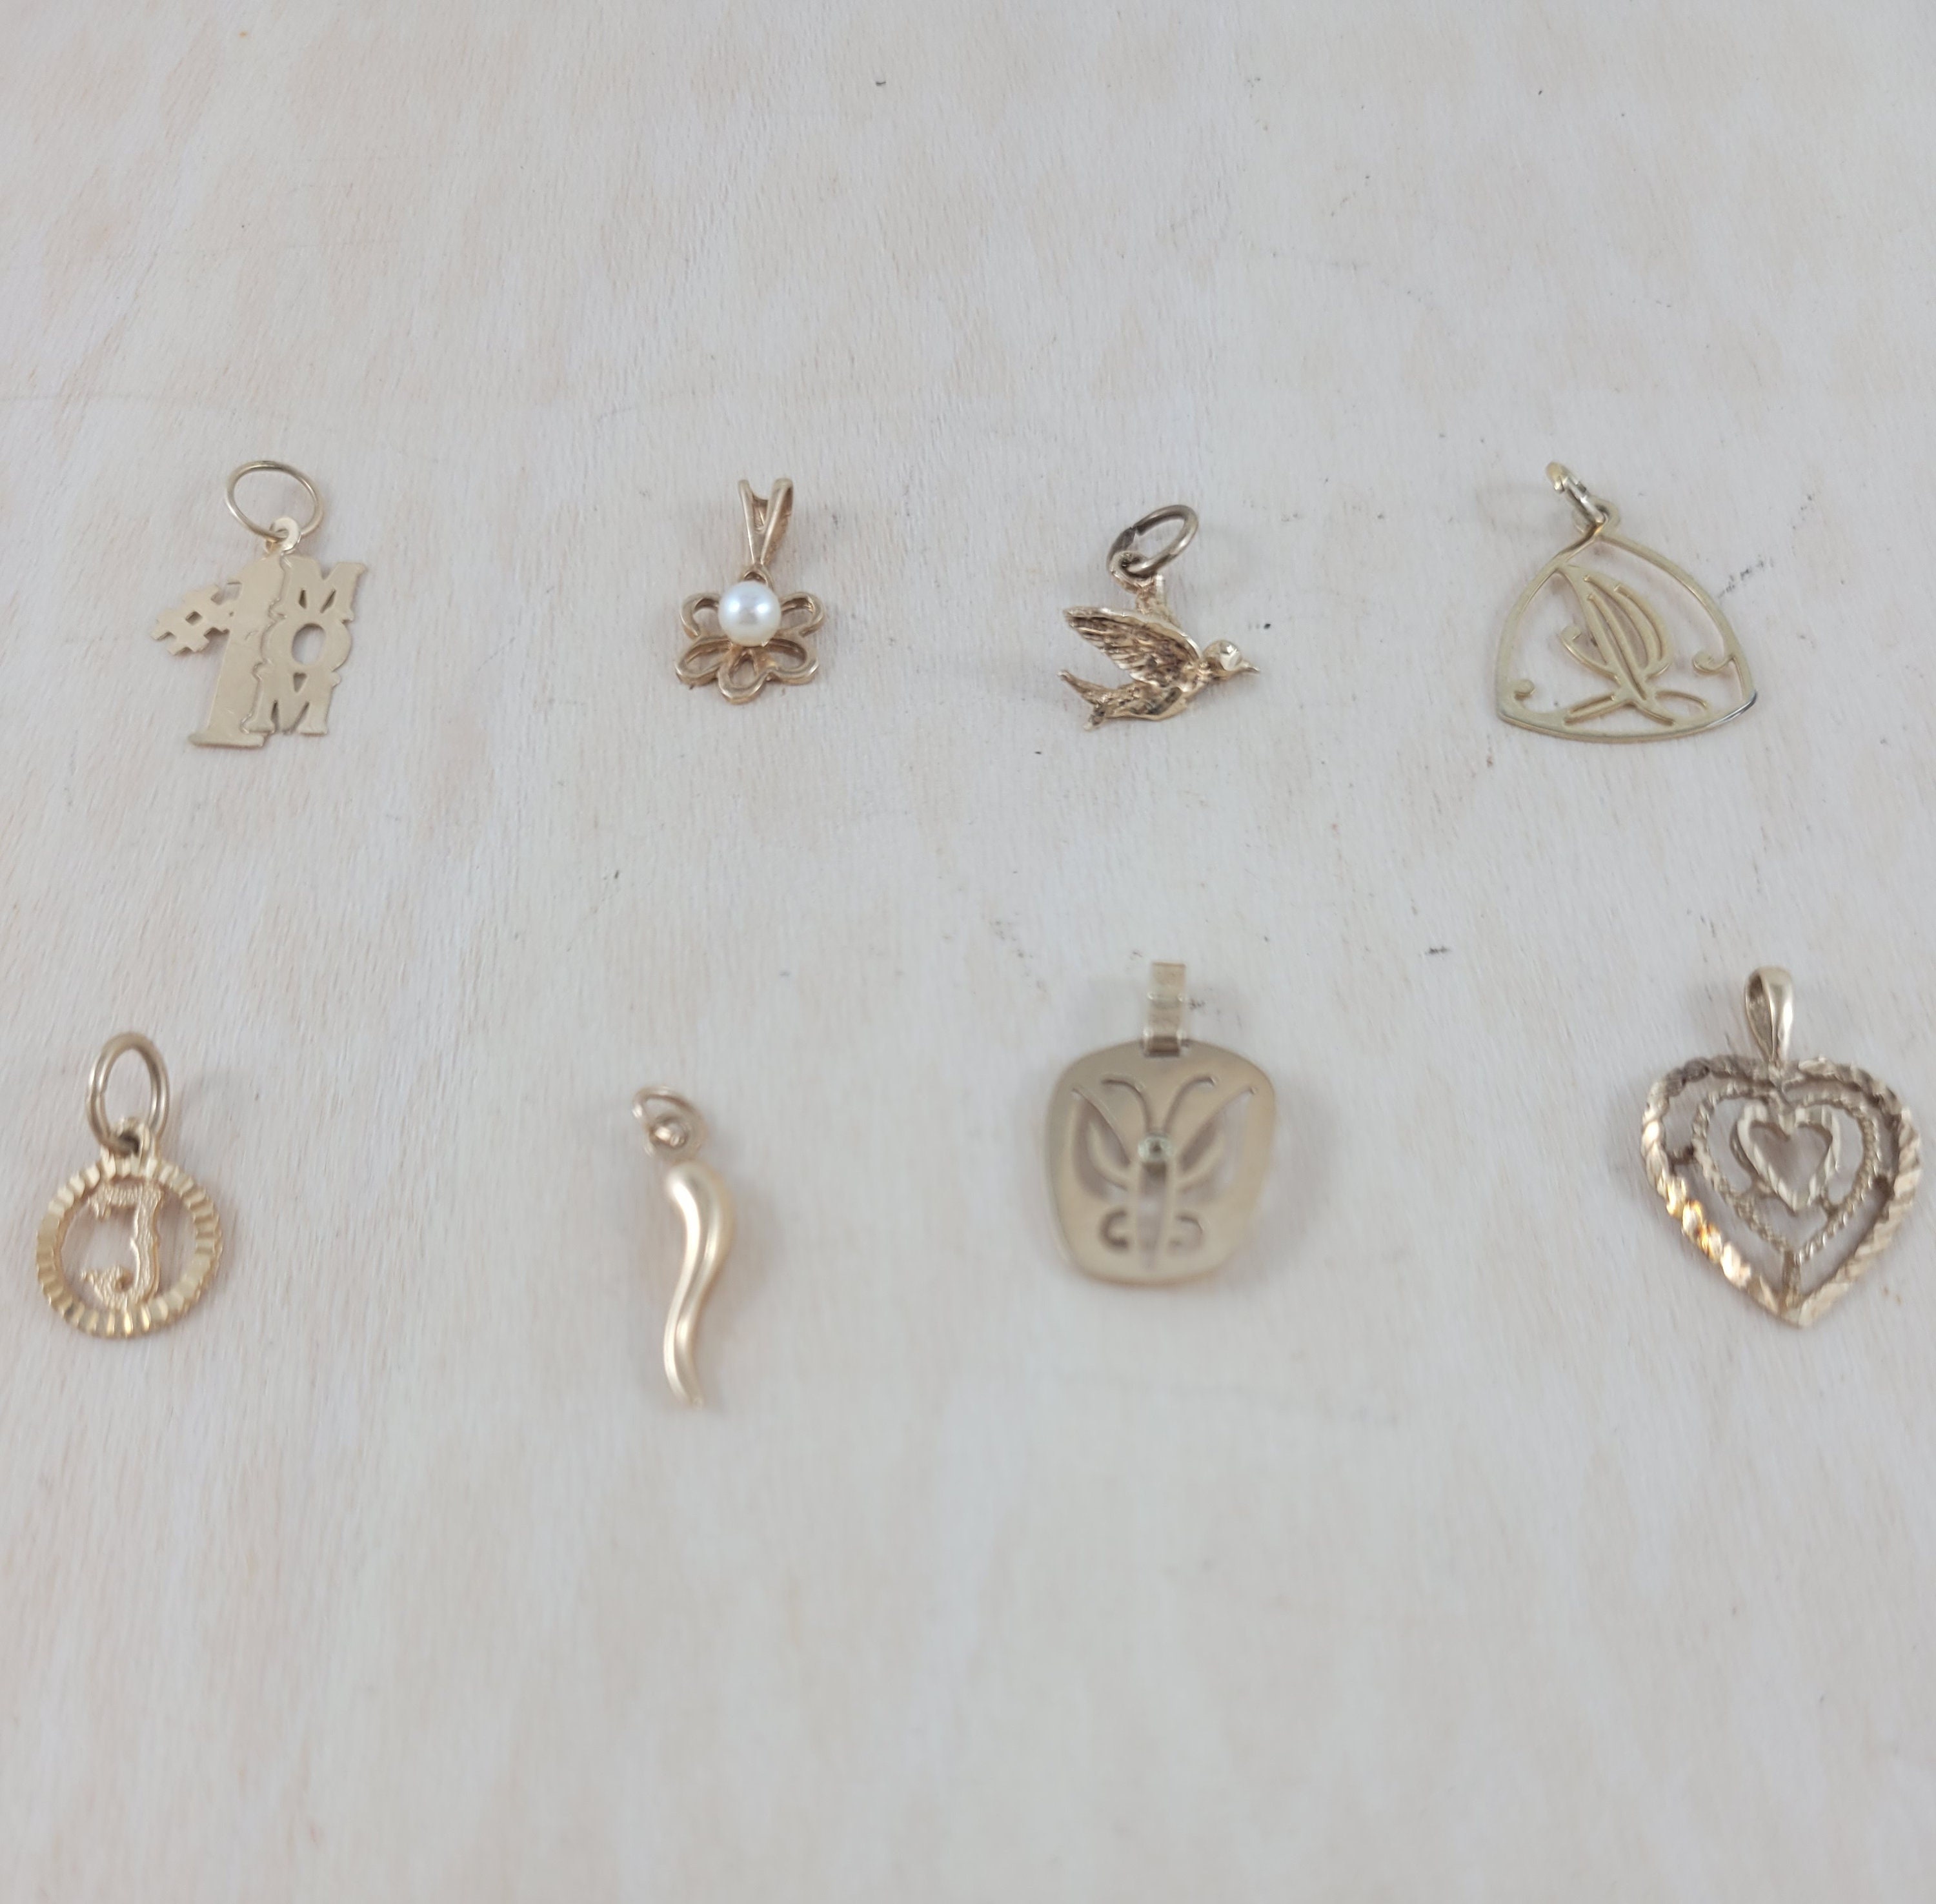 5 White Bow Charms, Wedding Bow Charm, Easter Bow Charms, Gold Bow Charms,  Jewelry Supplies, Jewelry Making, Earring Charms, Bracelet Charms 